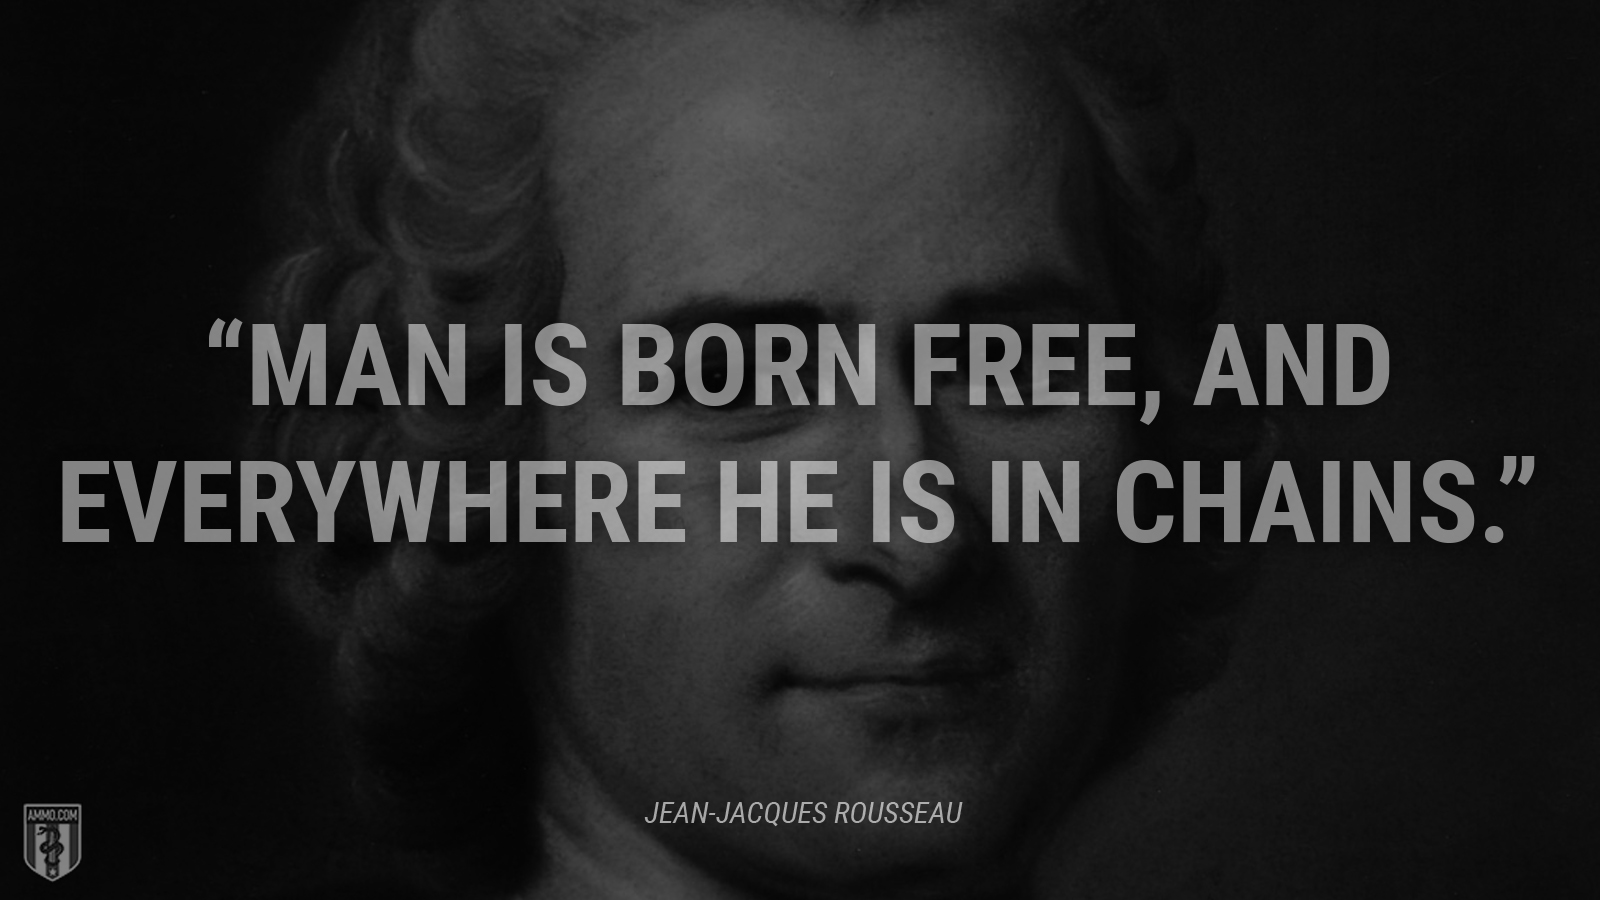 “Man is born free, and everywhere he is in chains.” - Jean-Jacques Rousseau